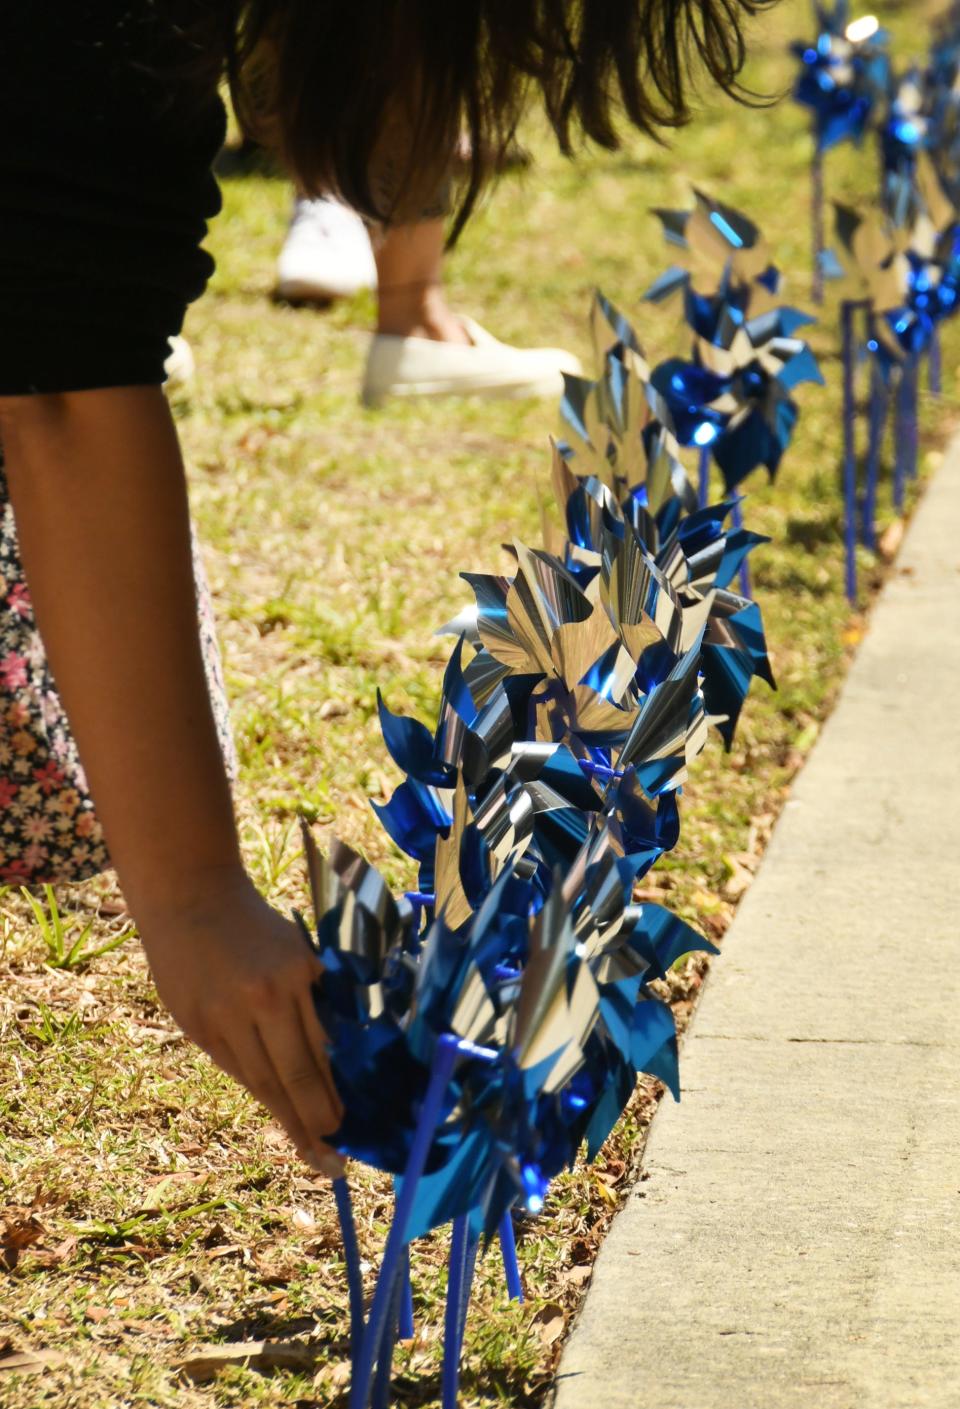  The Child Abuse Prevention Task Force, court staff,  child welfare professionals from several agencies, and others took part in the April 18 Pinwheel Planting and a proclamation read by Circuit Judge Kelly J. McKibben, including words by Governor Ron DeSantis, outside the Moore Justice Center in Viera. 